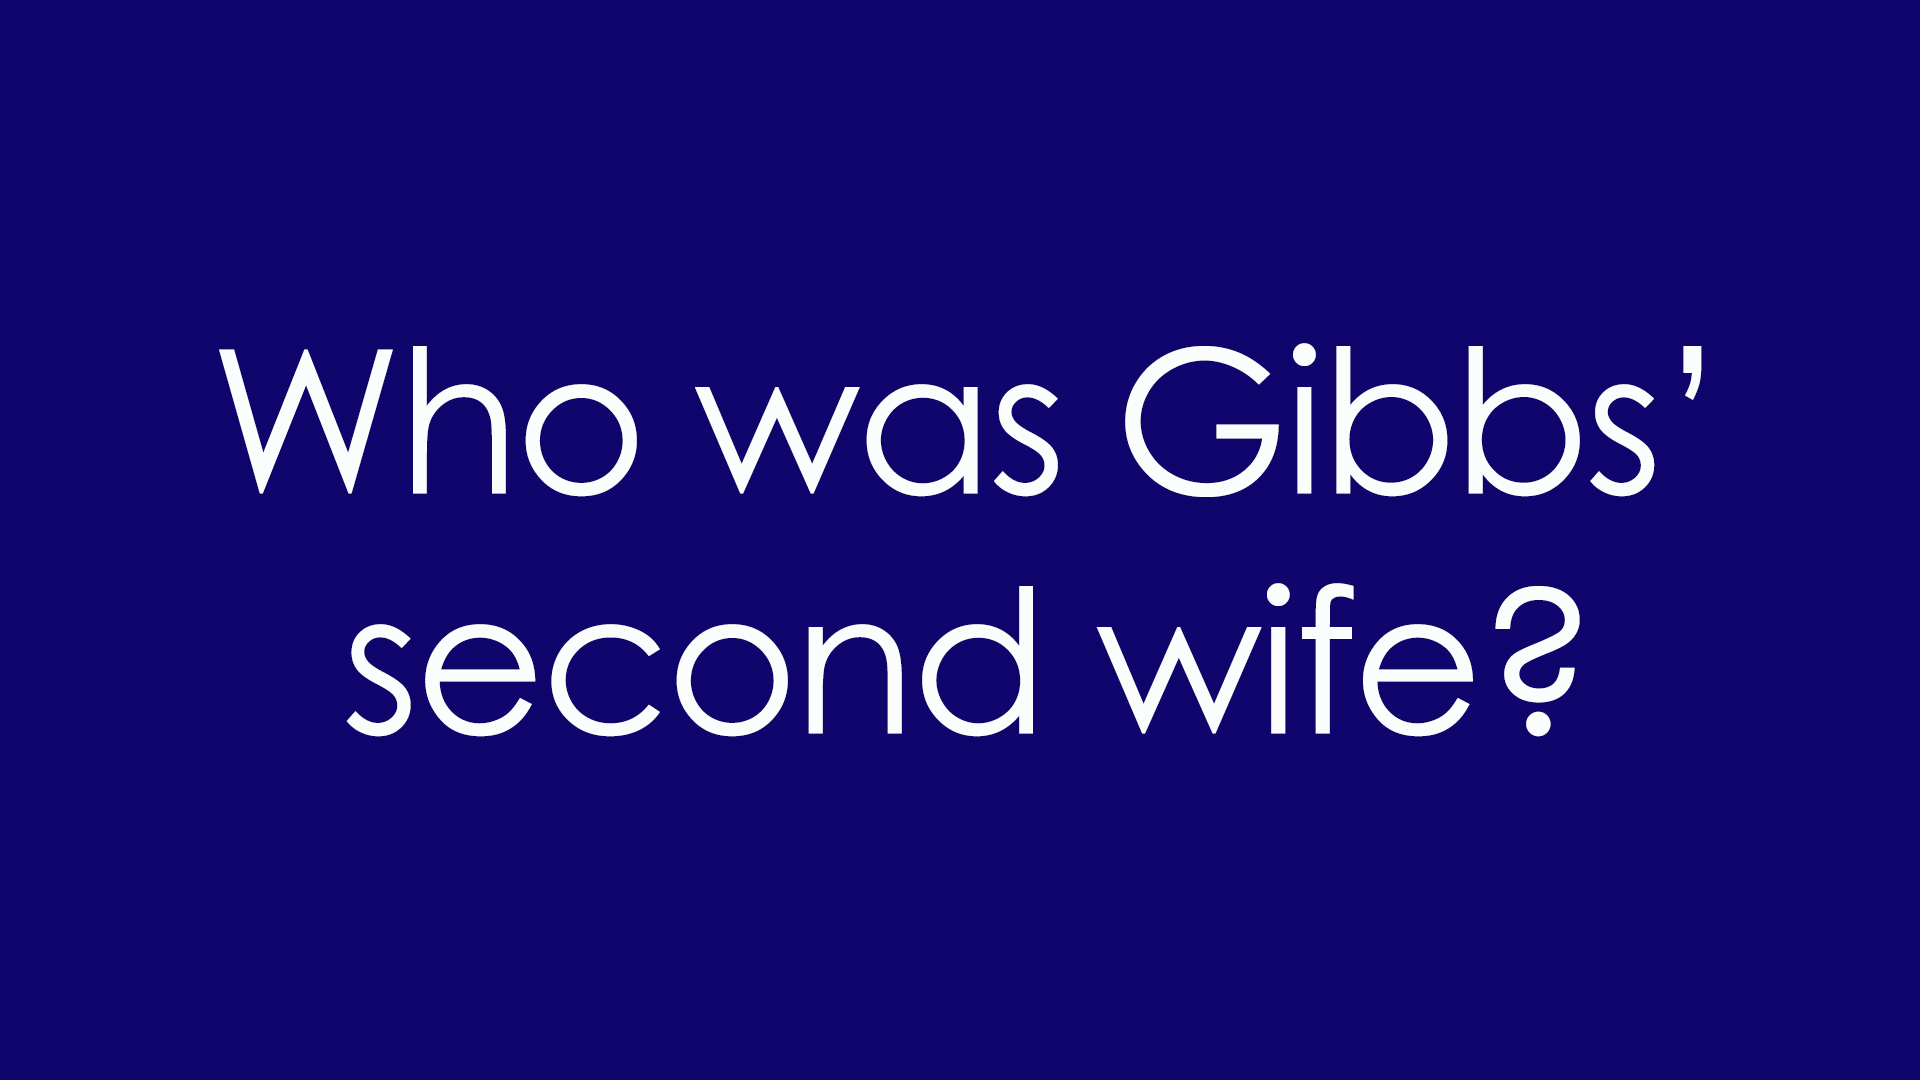 4. Who was Gibbs' second wife?